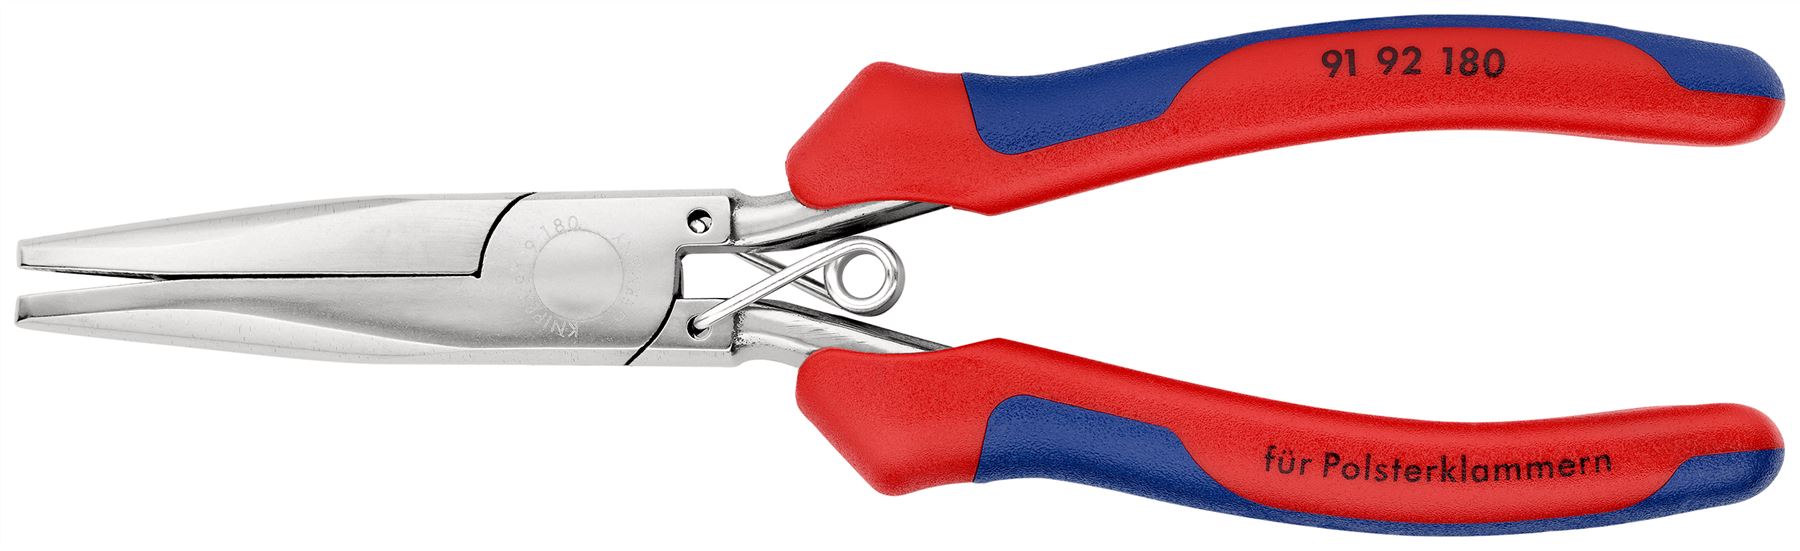 Knipex Upholstery Pliers 180mm Multi Component Grips 71 92 180